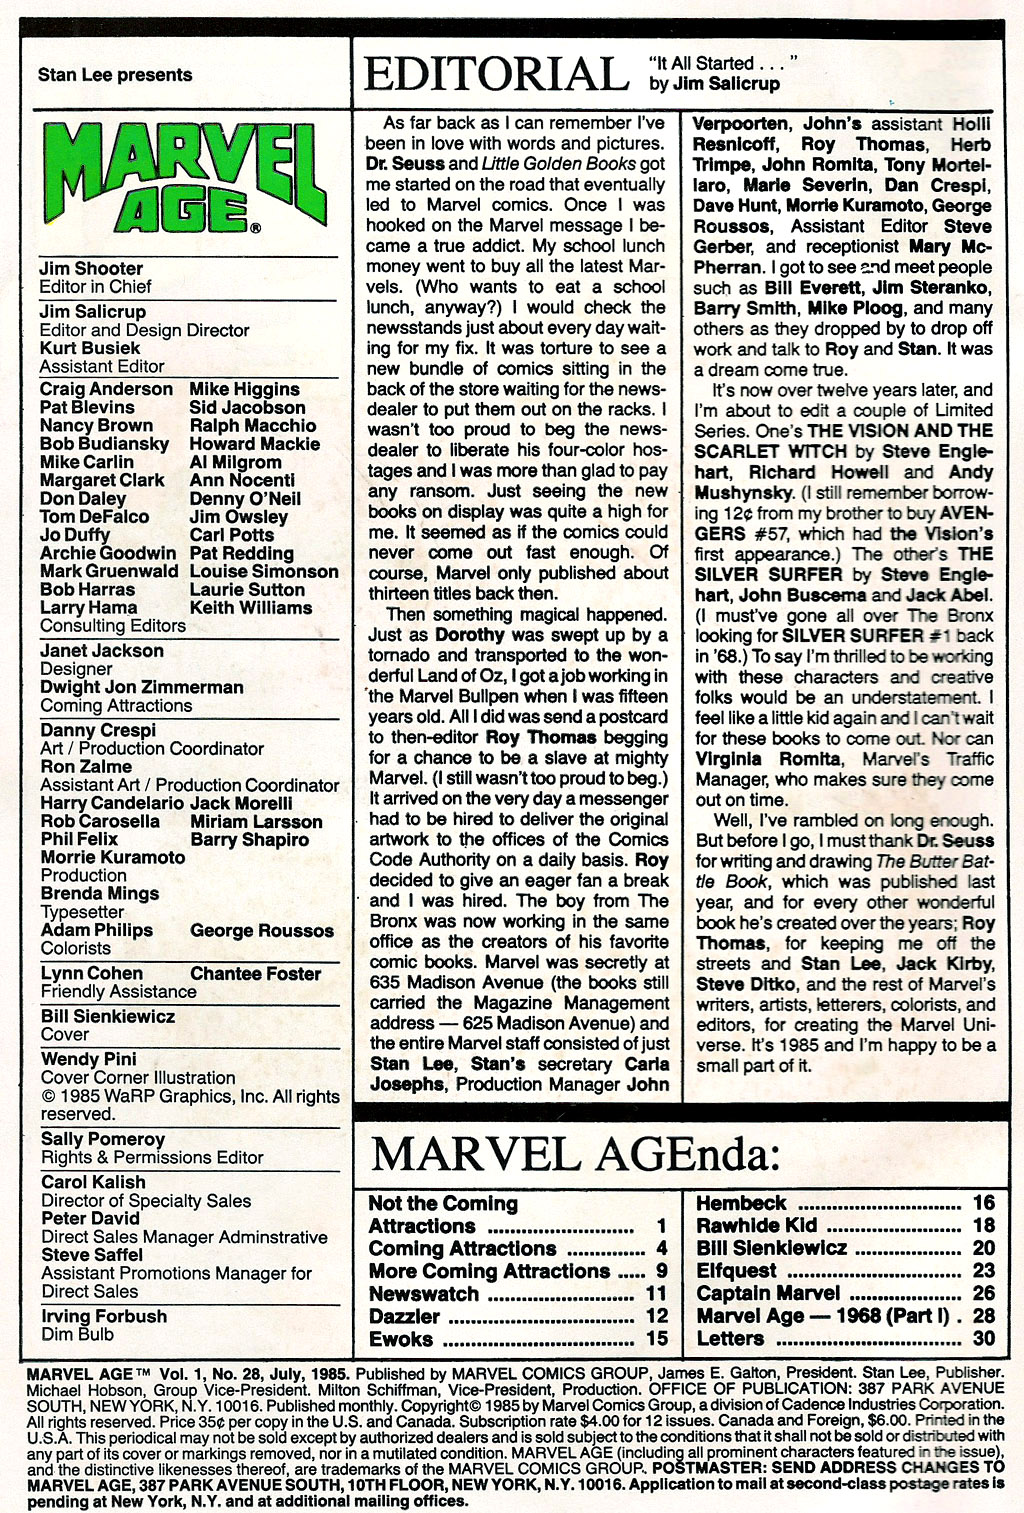 Read online Marvel Age comic -  Issue #28 - 2